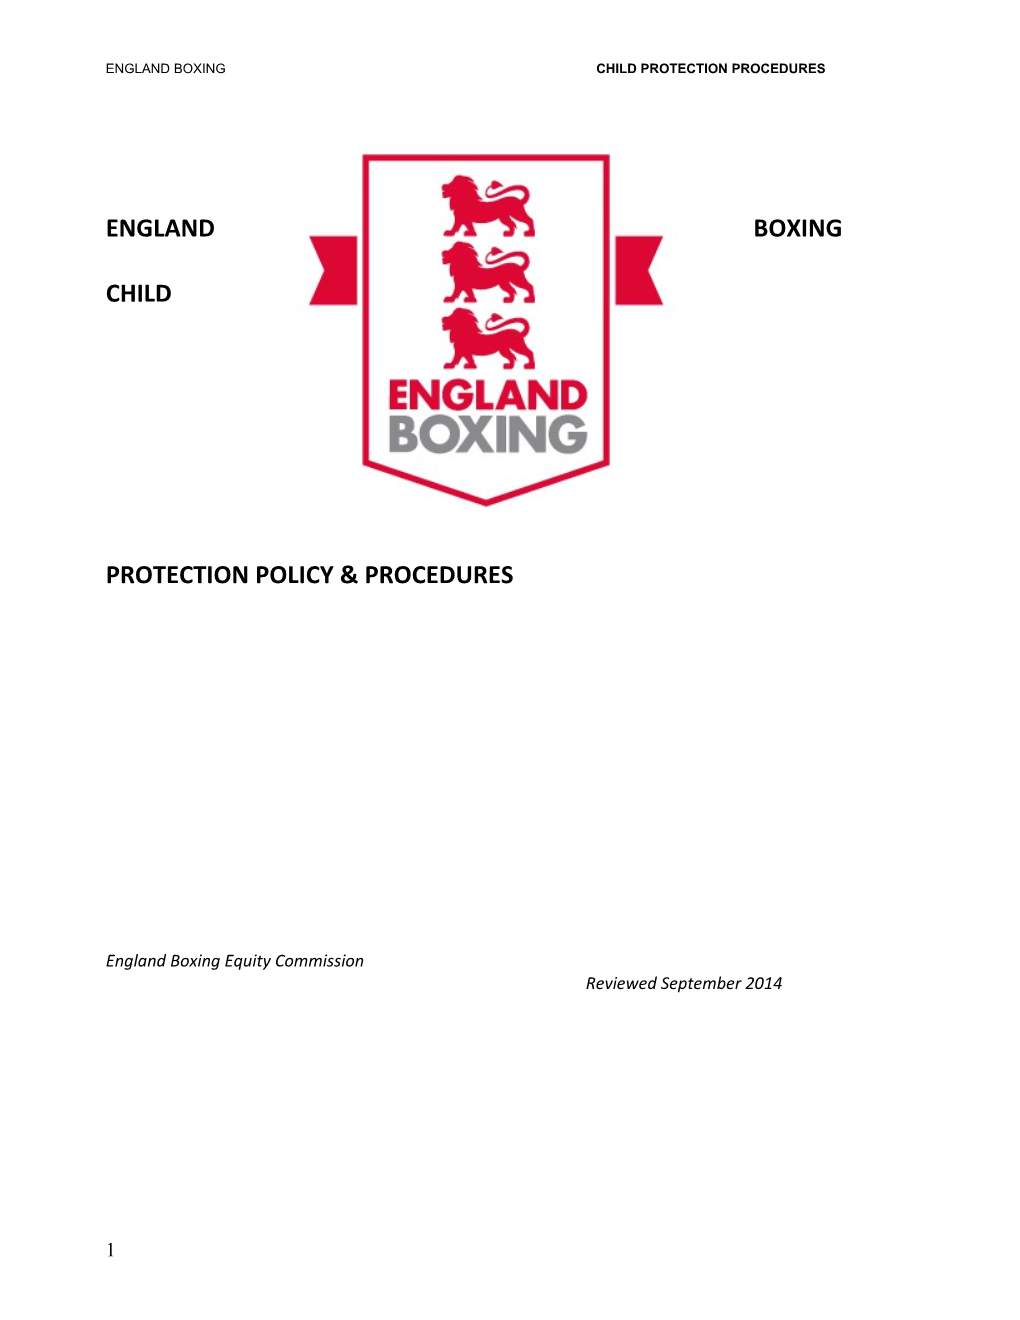 England Boxing Child Protection Procedures